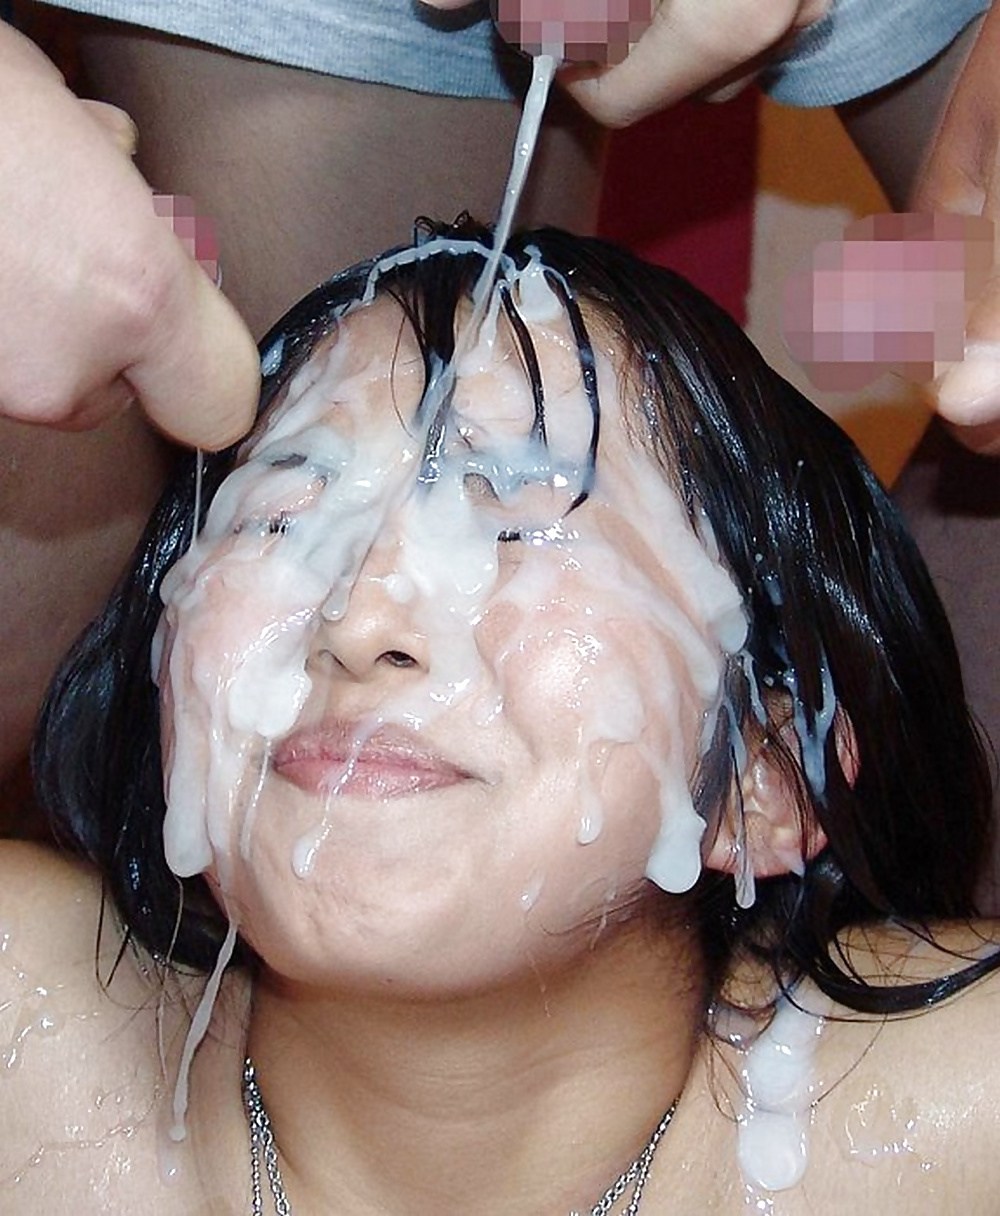 Cum In Asian Babes - Asian Girl Covered in Sperm (66 photos) - porn photo